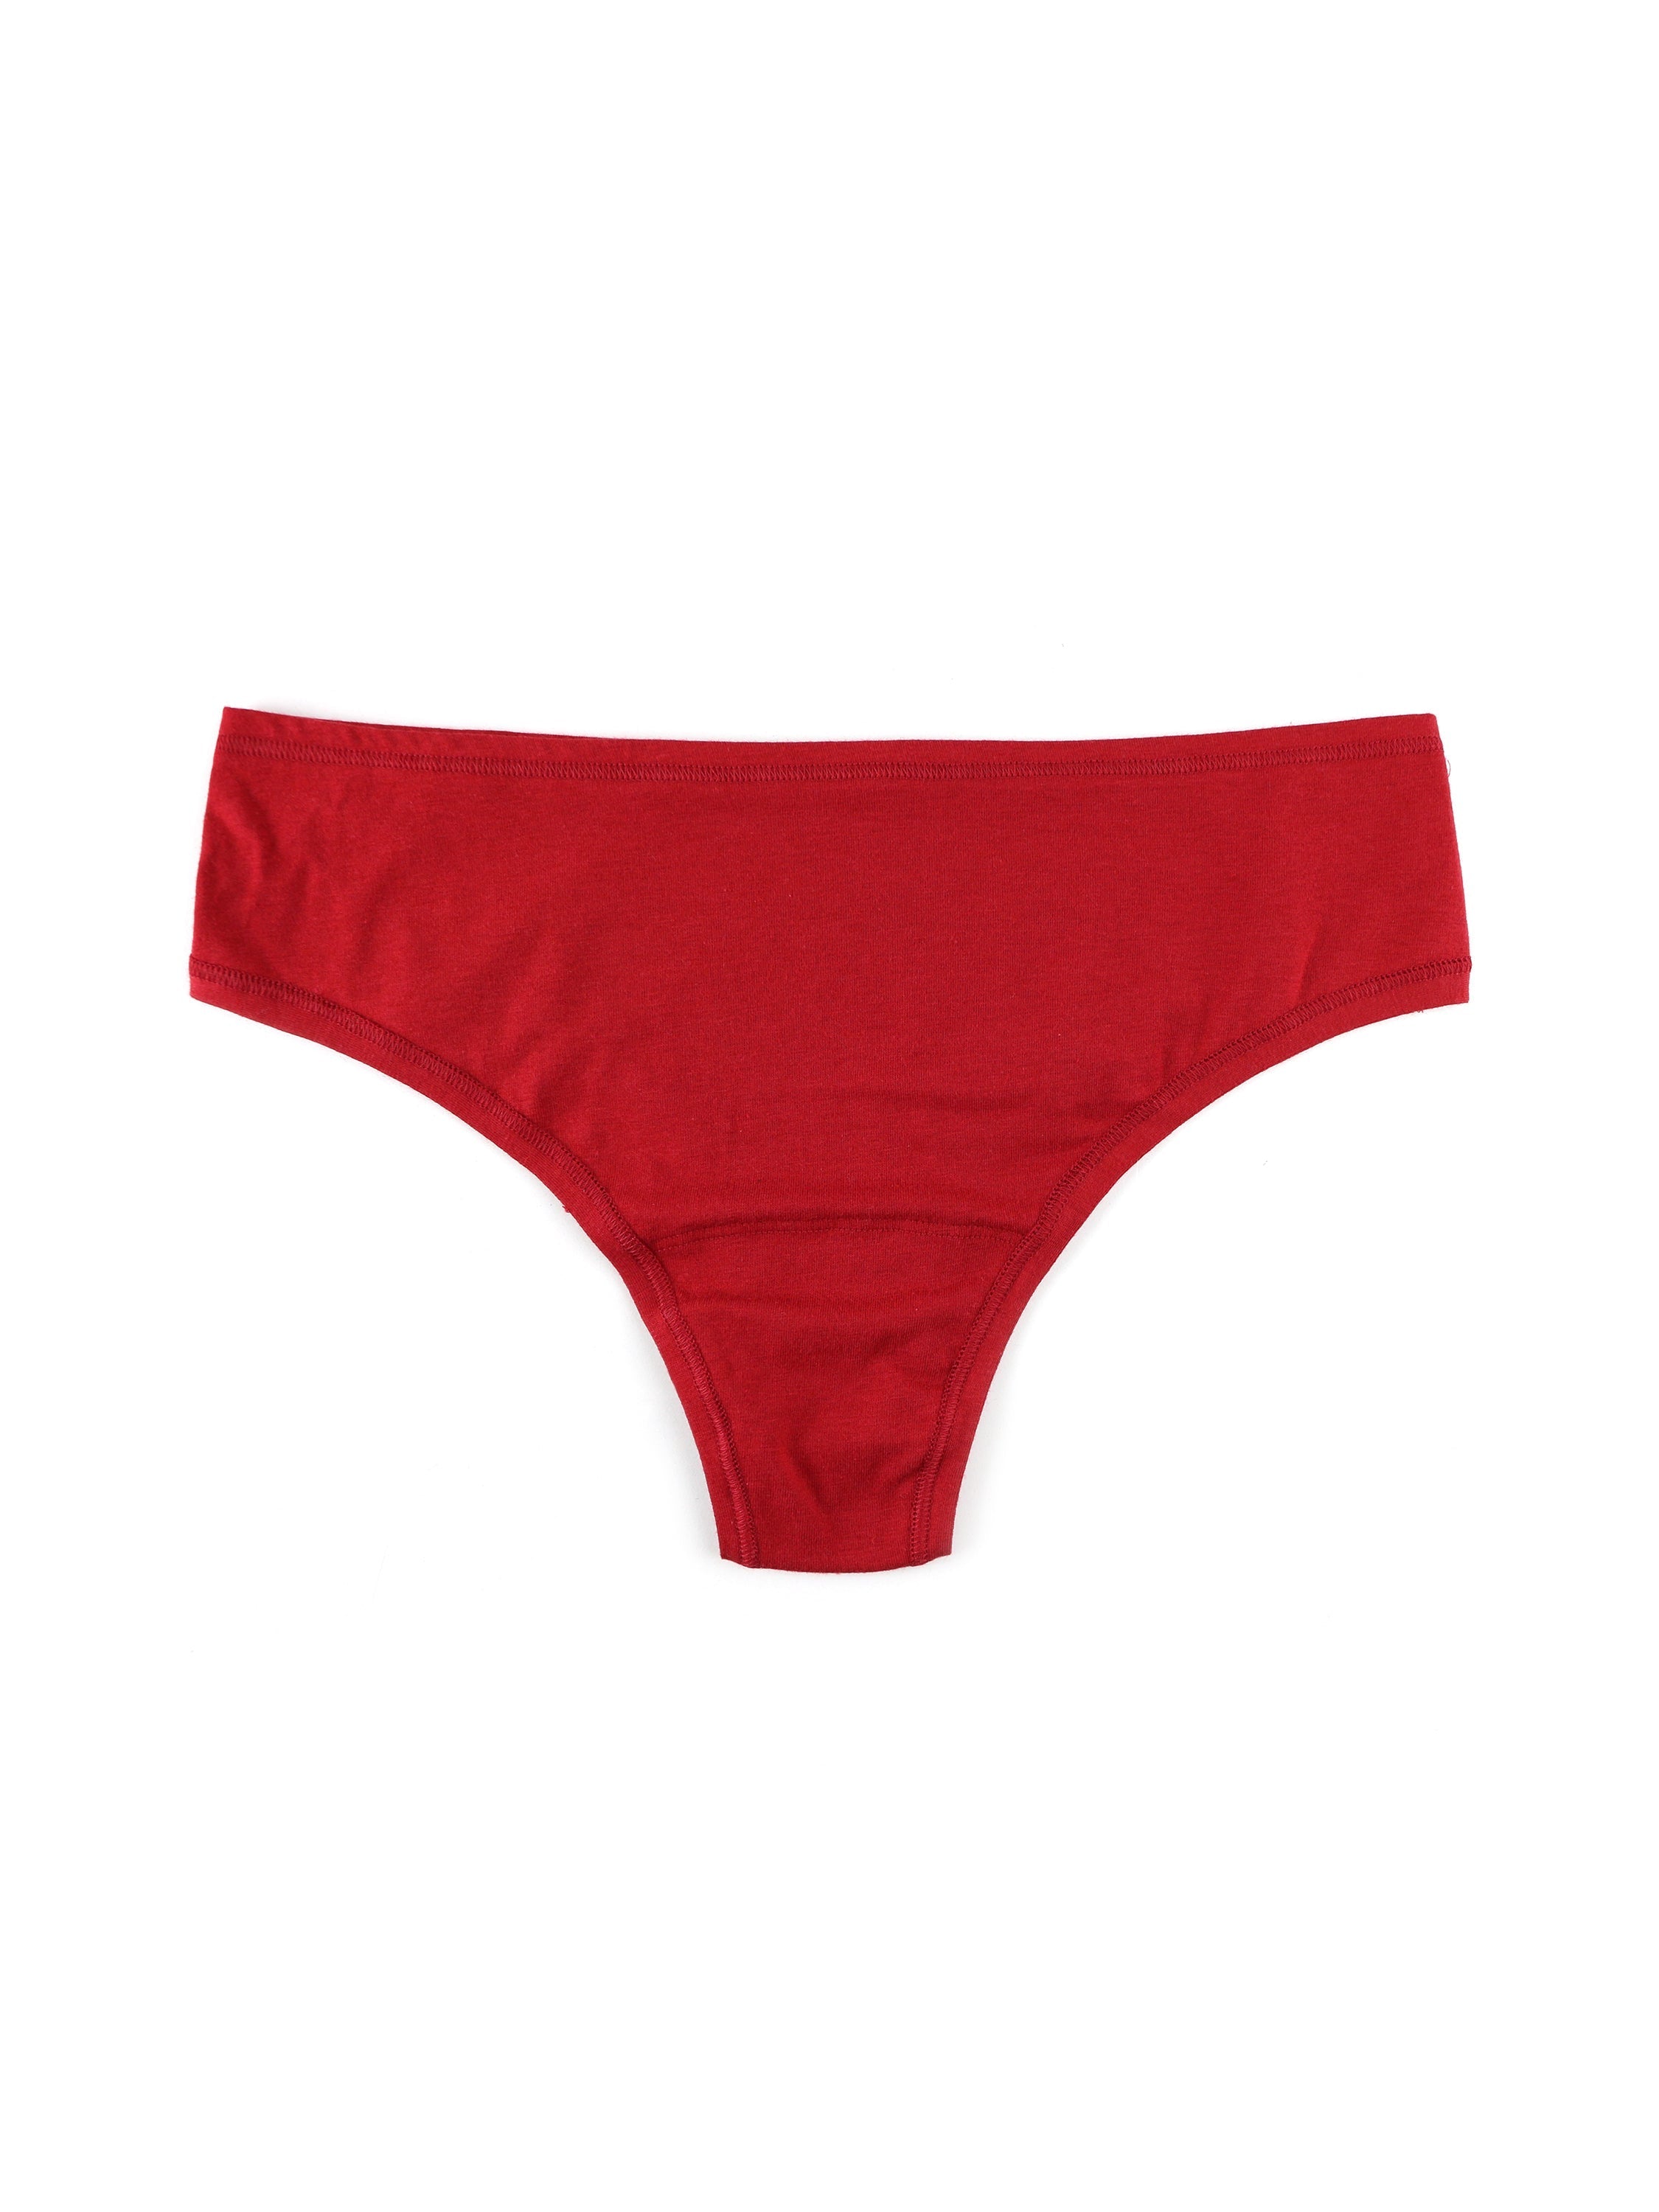 PLAYSTRETCH 3 for $48 | Mix & Match Underwear | Hanky Panky